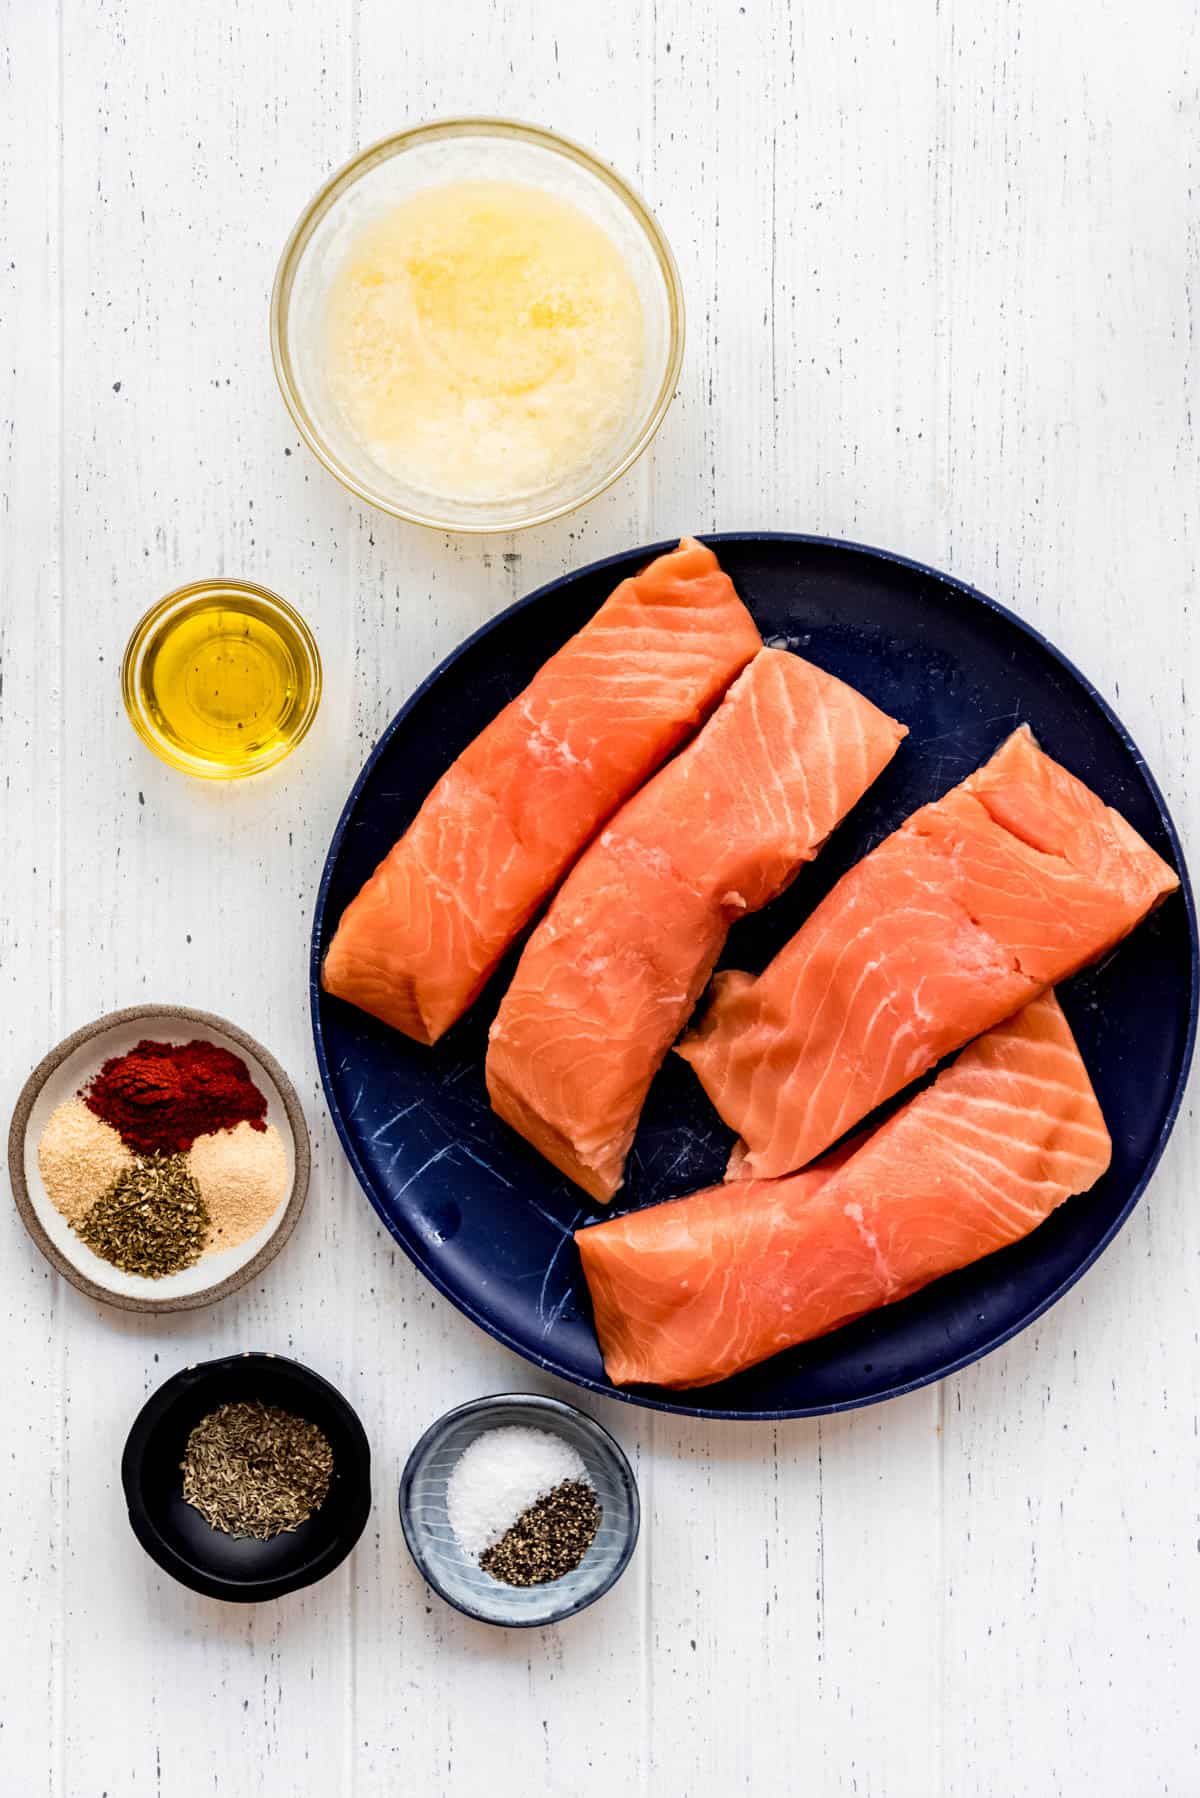 butter, olive oil, spices, and salmon fillets